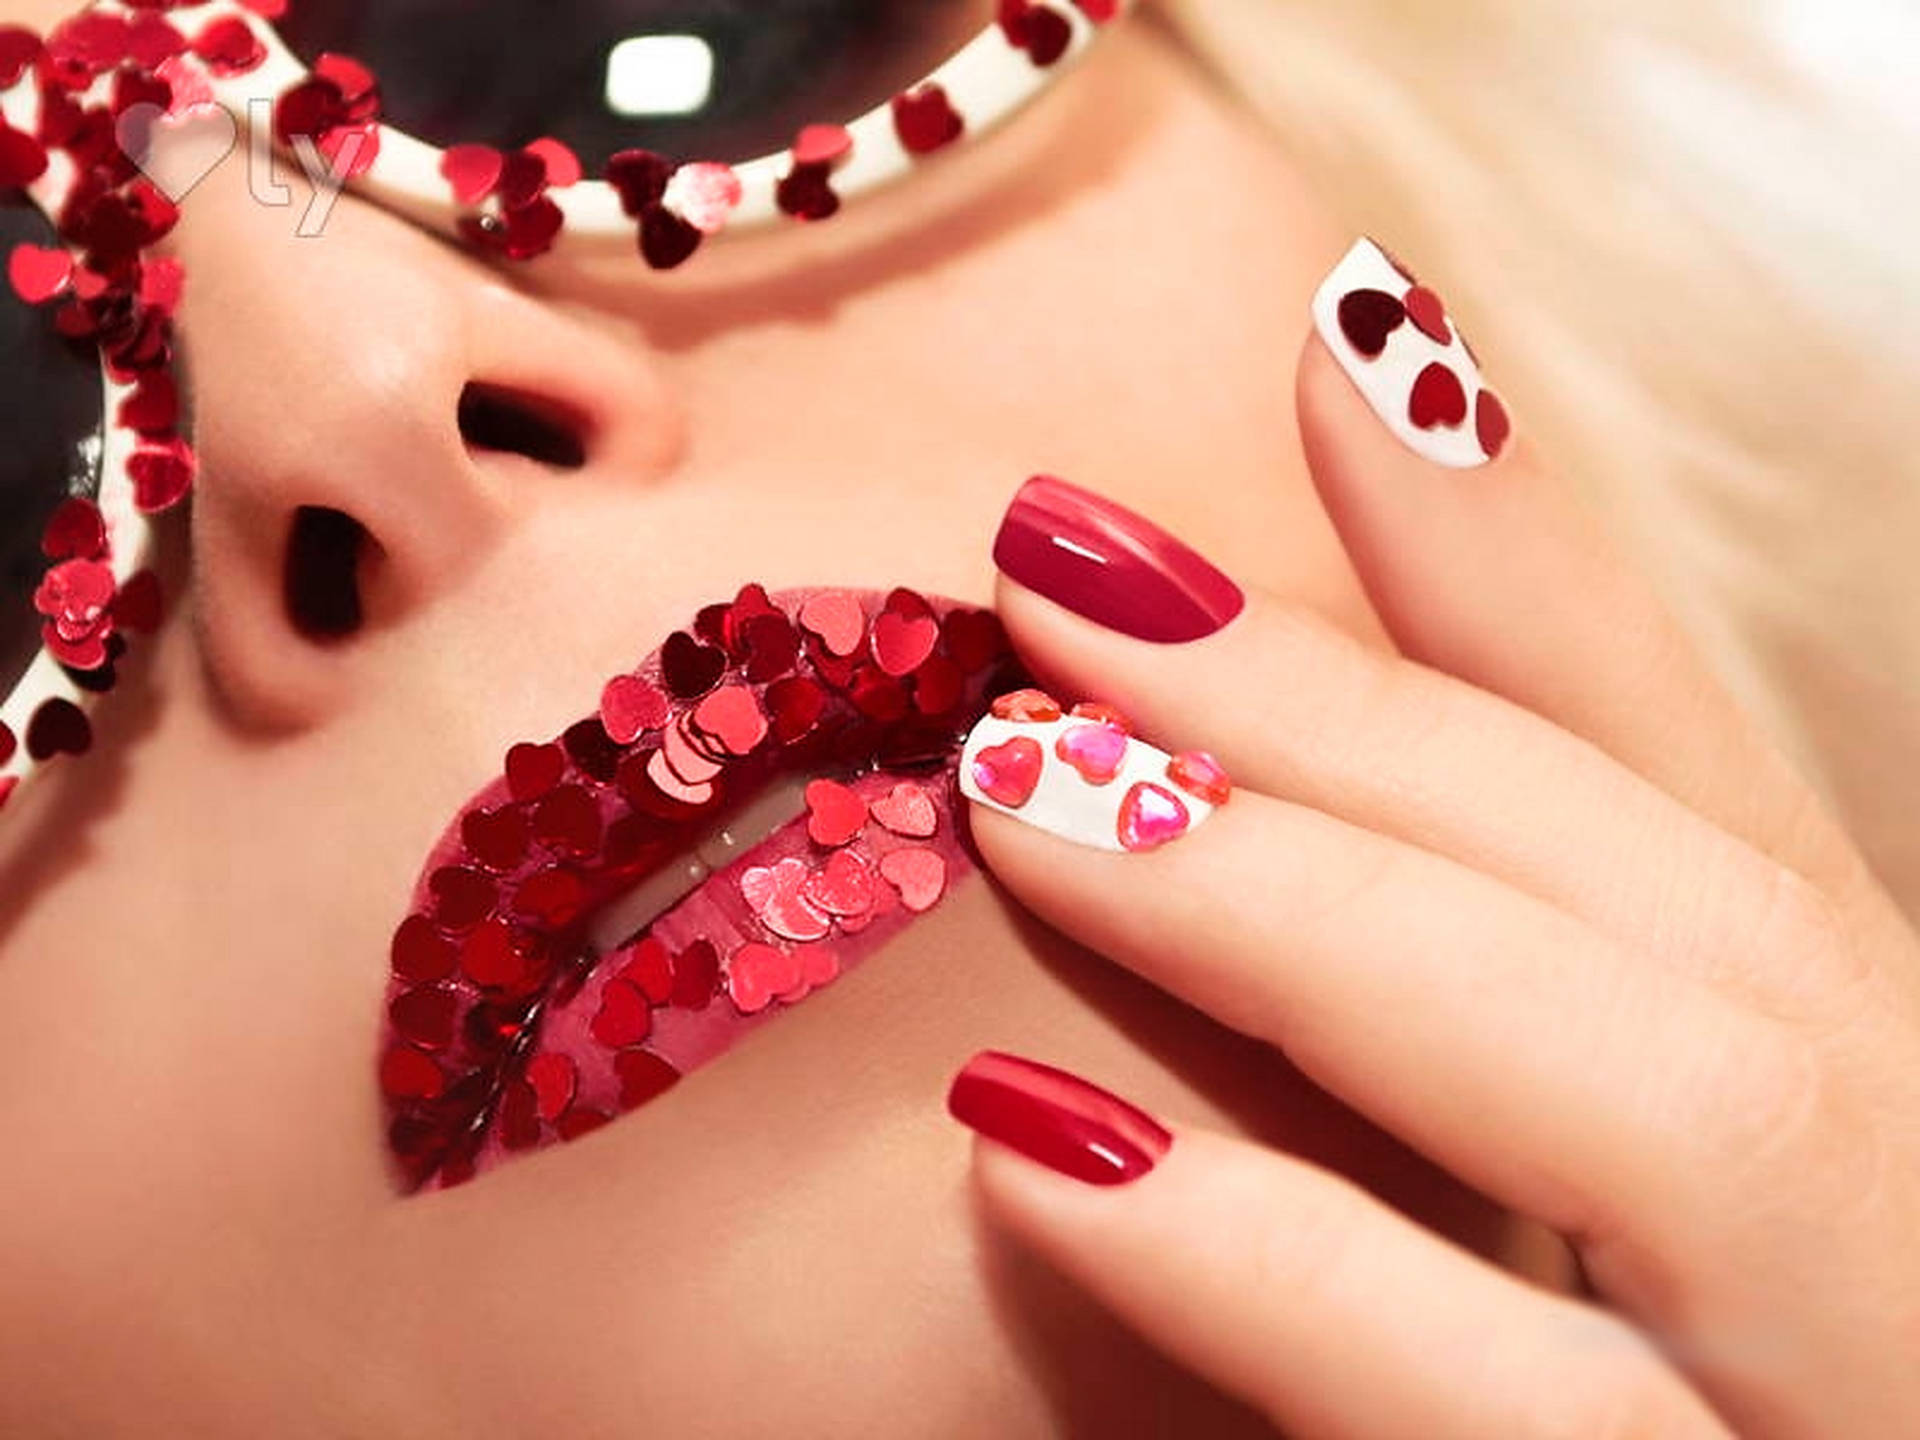 Exquisite Red And White Nail Art Design Background